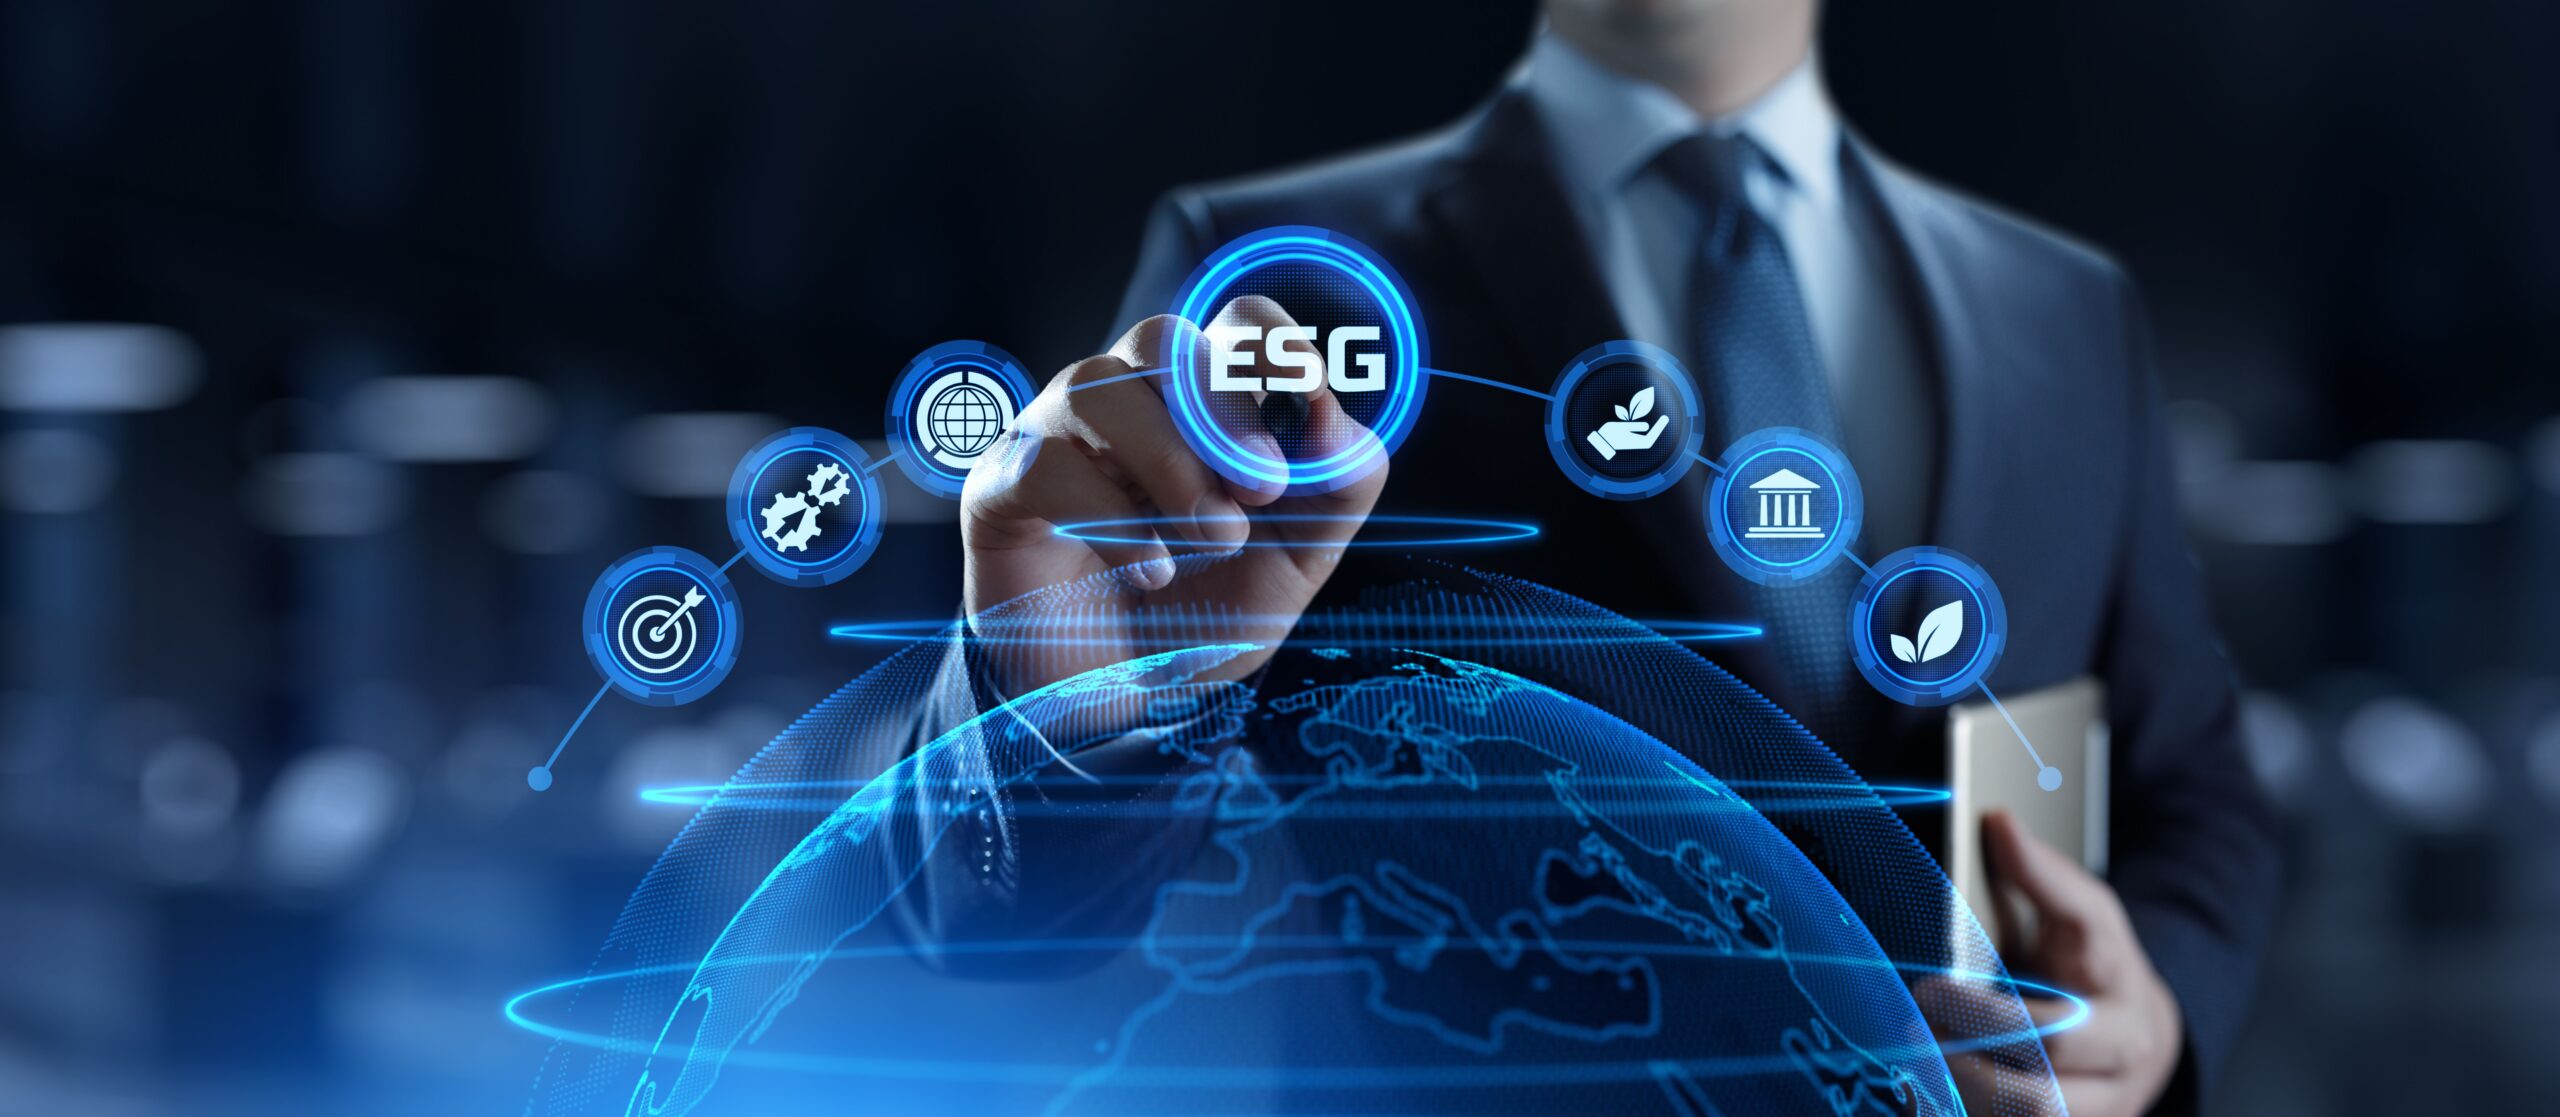 Looking to the Future of ESG With Digital Transformation